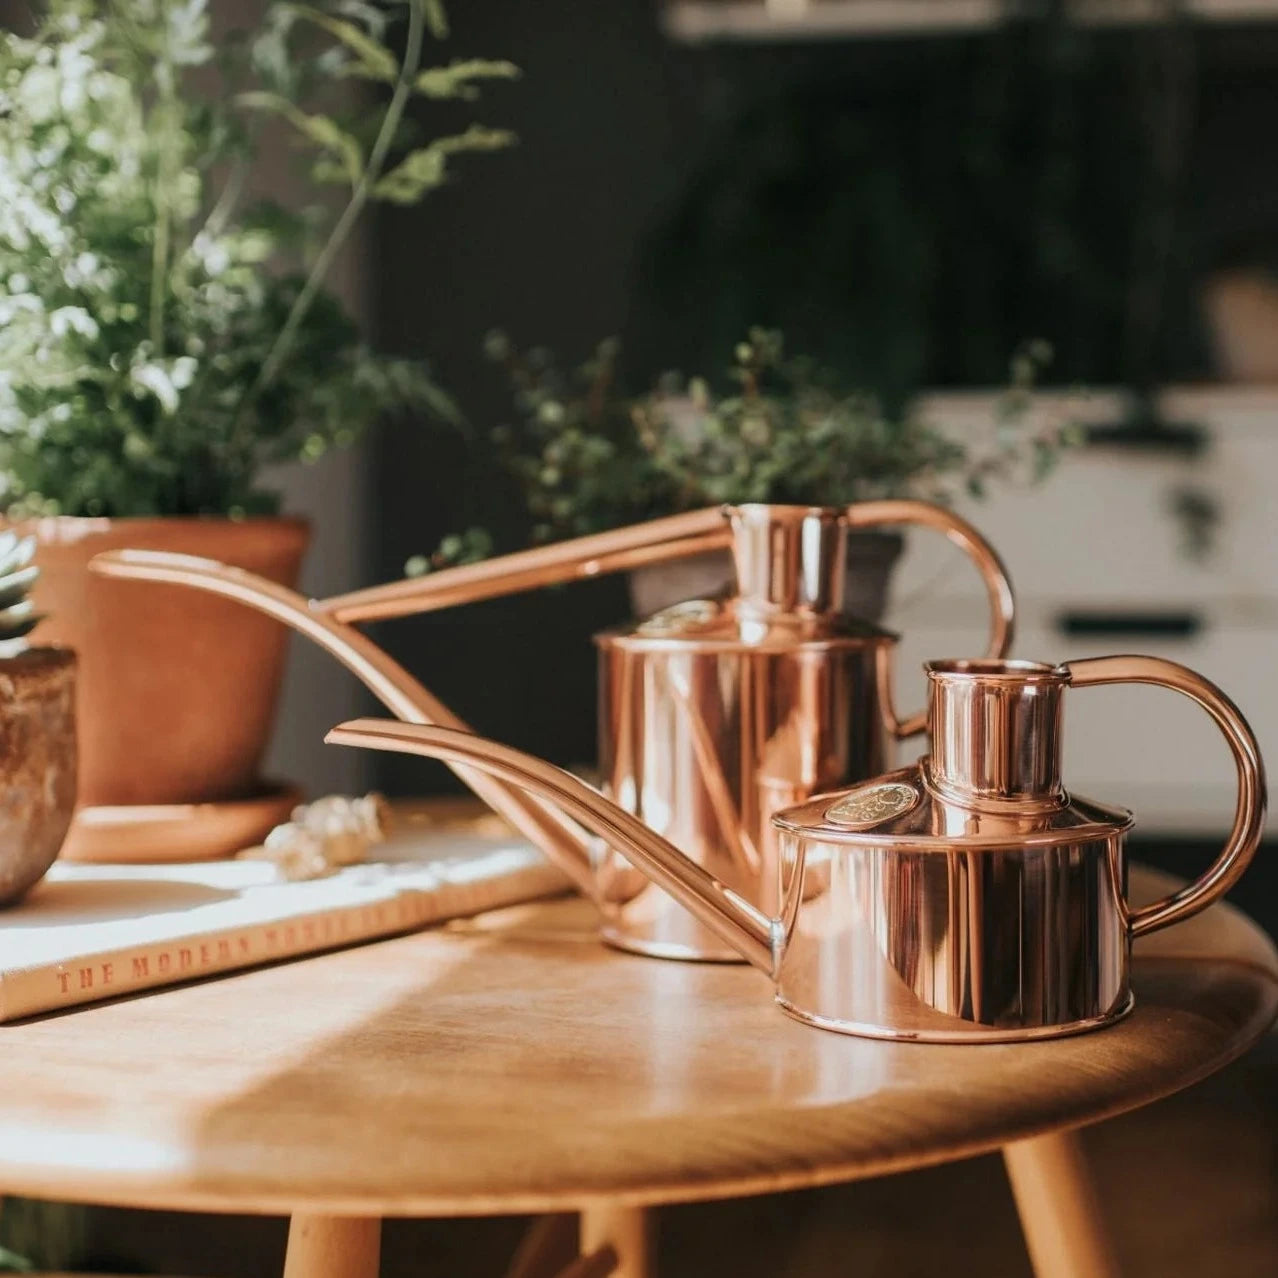 Showing the two different sizes copper Fazeley watering cans